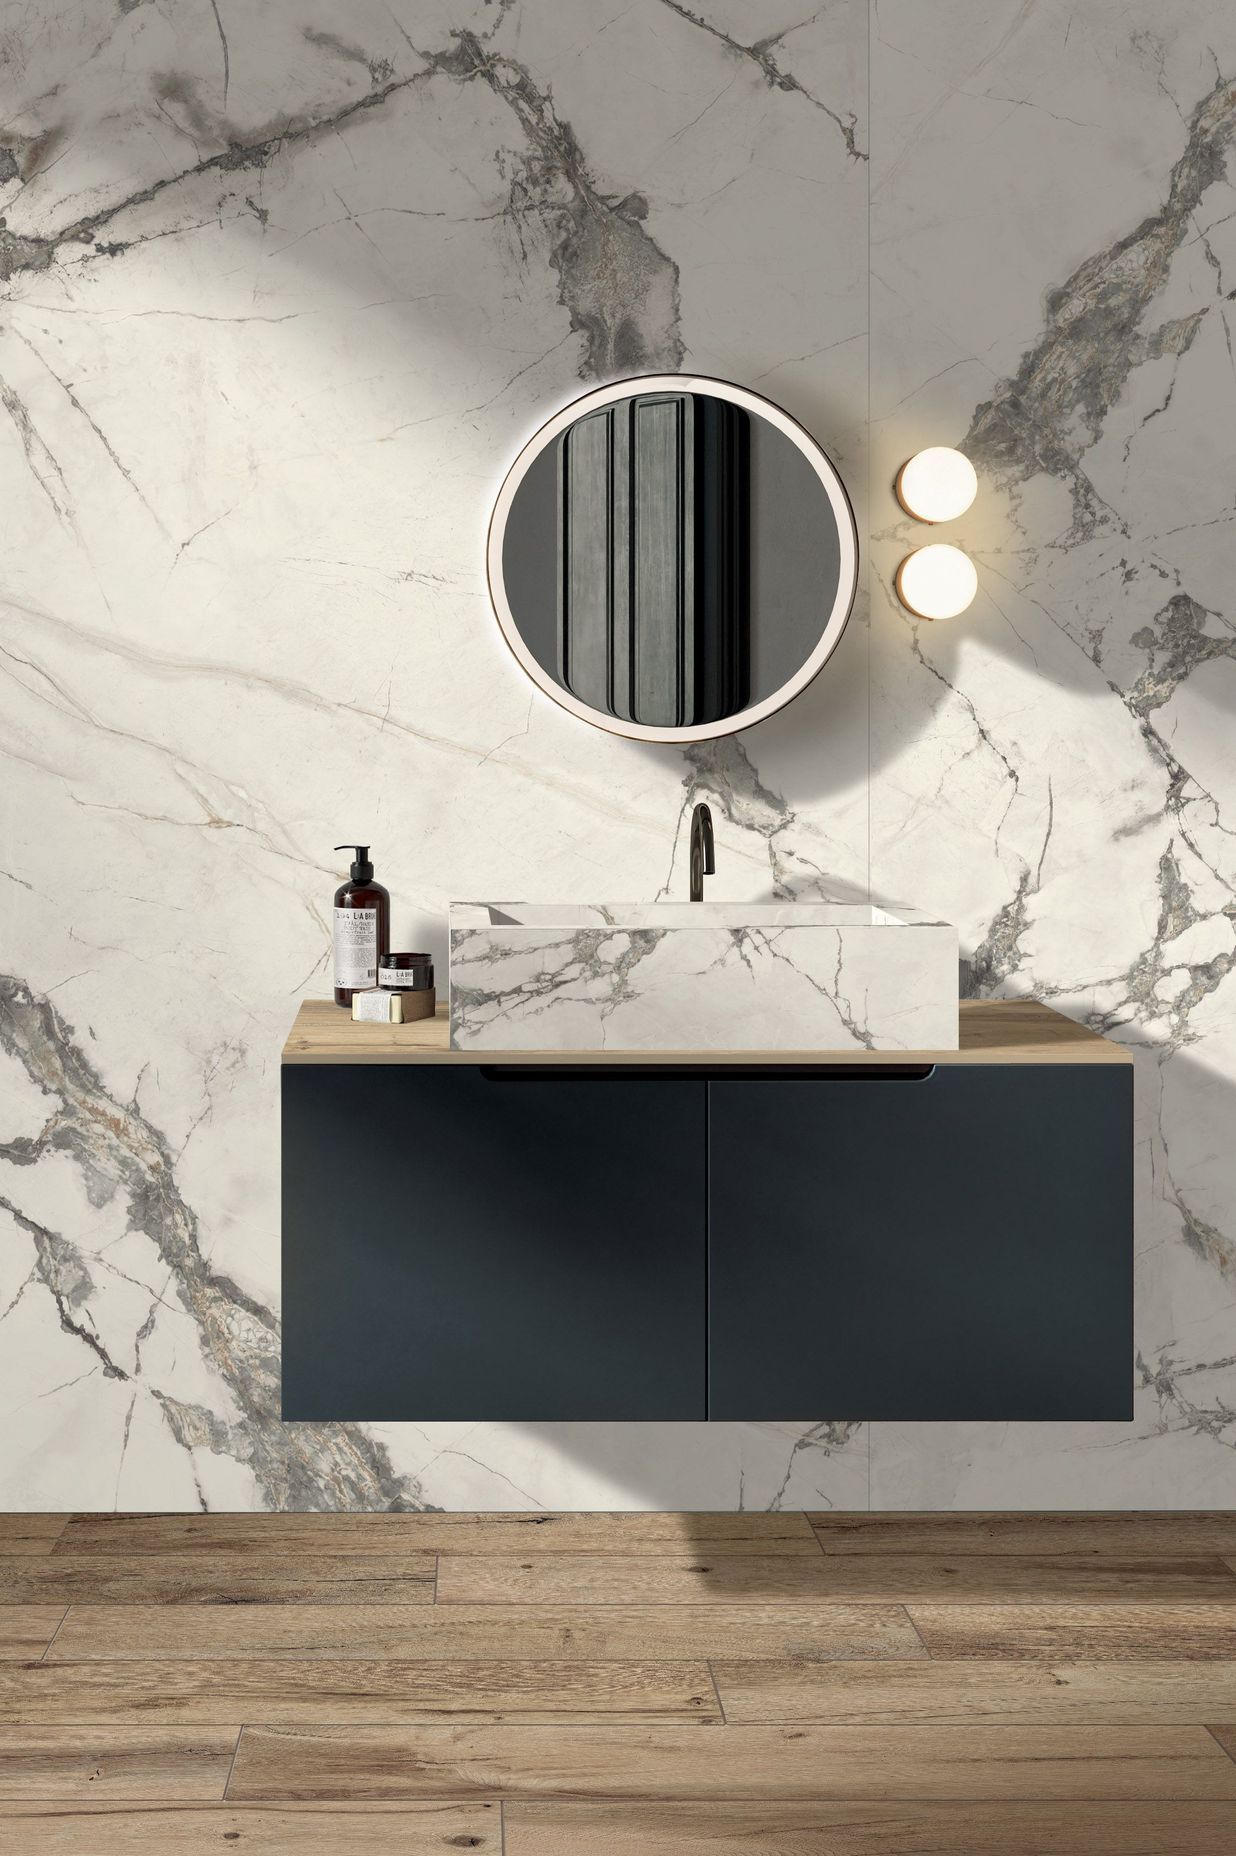 Non-porous and easy to clean, porcelain can be used in the bathroom – from the walls to the basin.